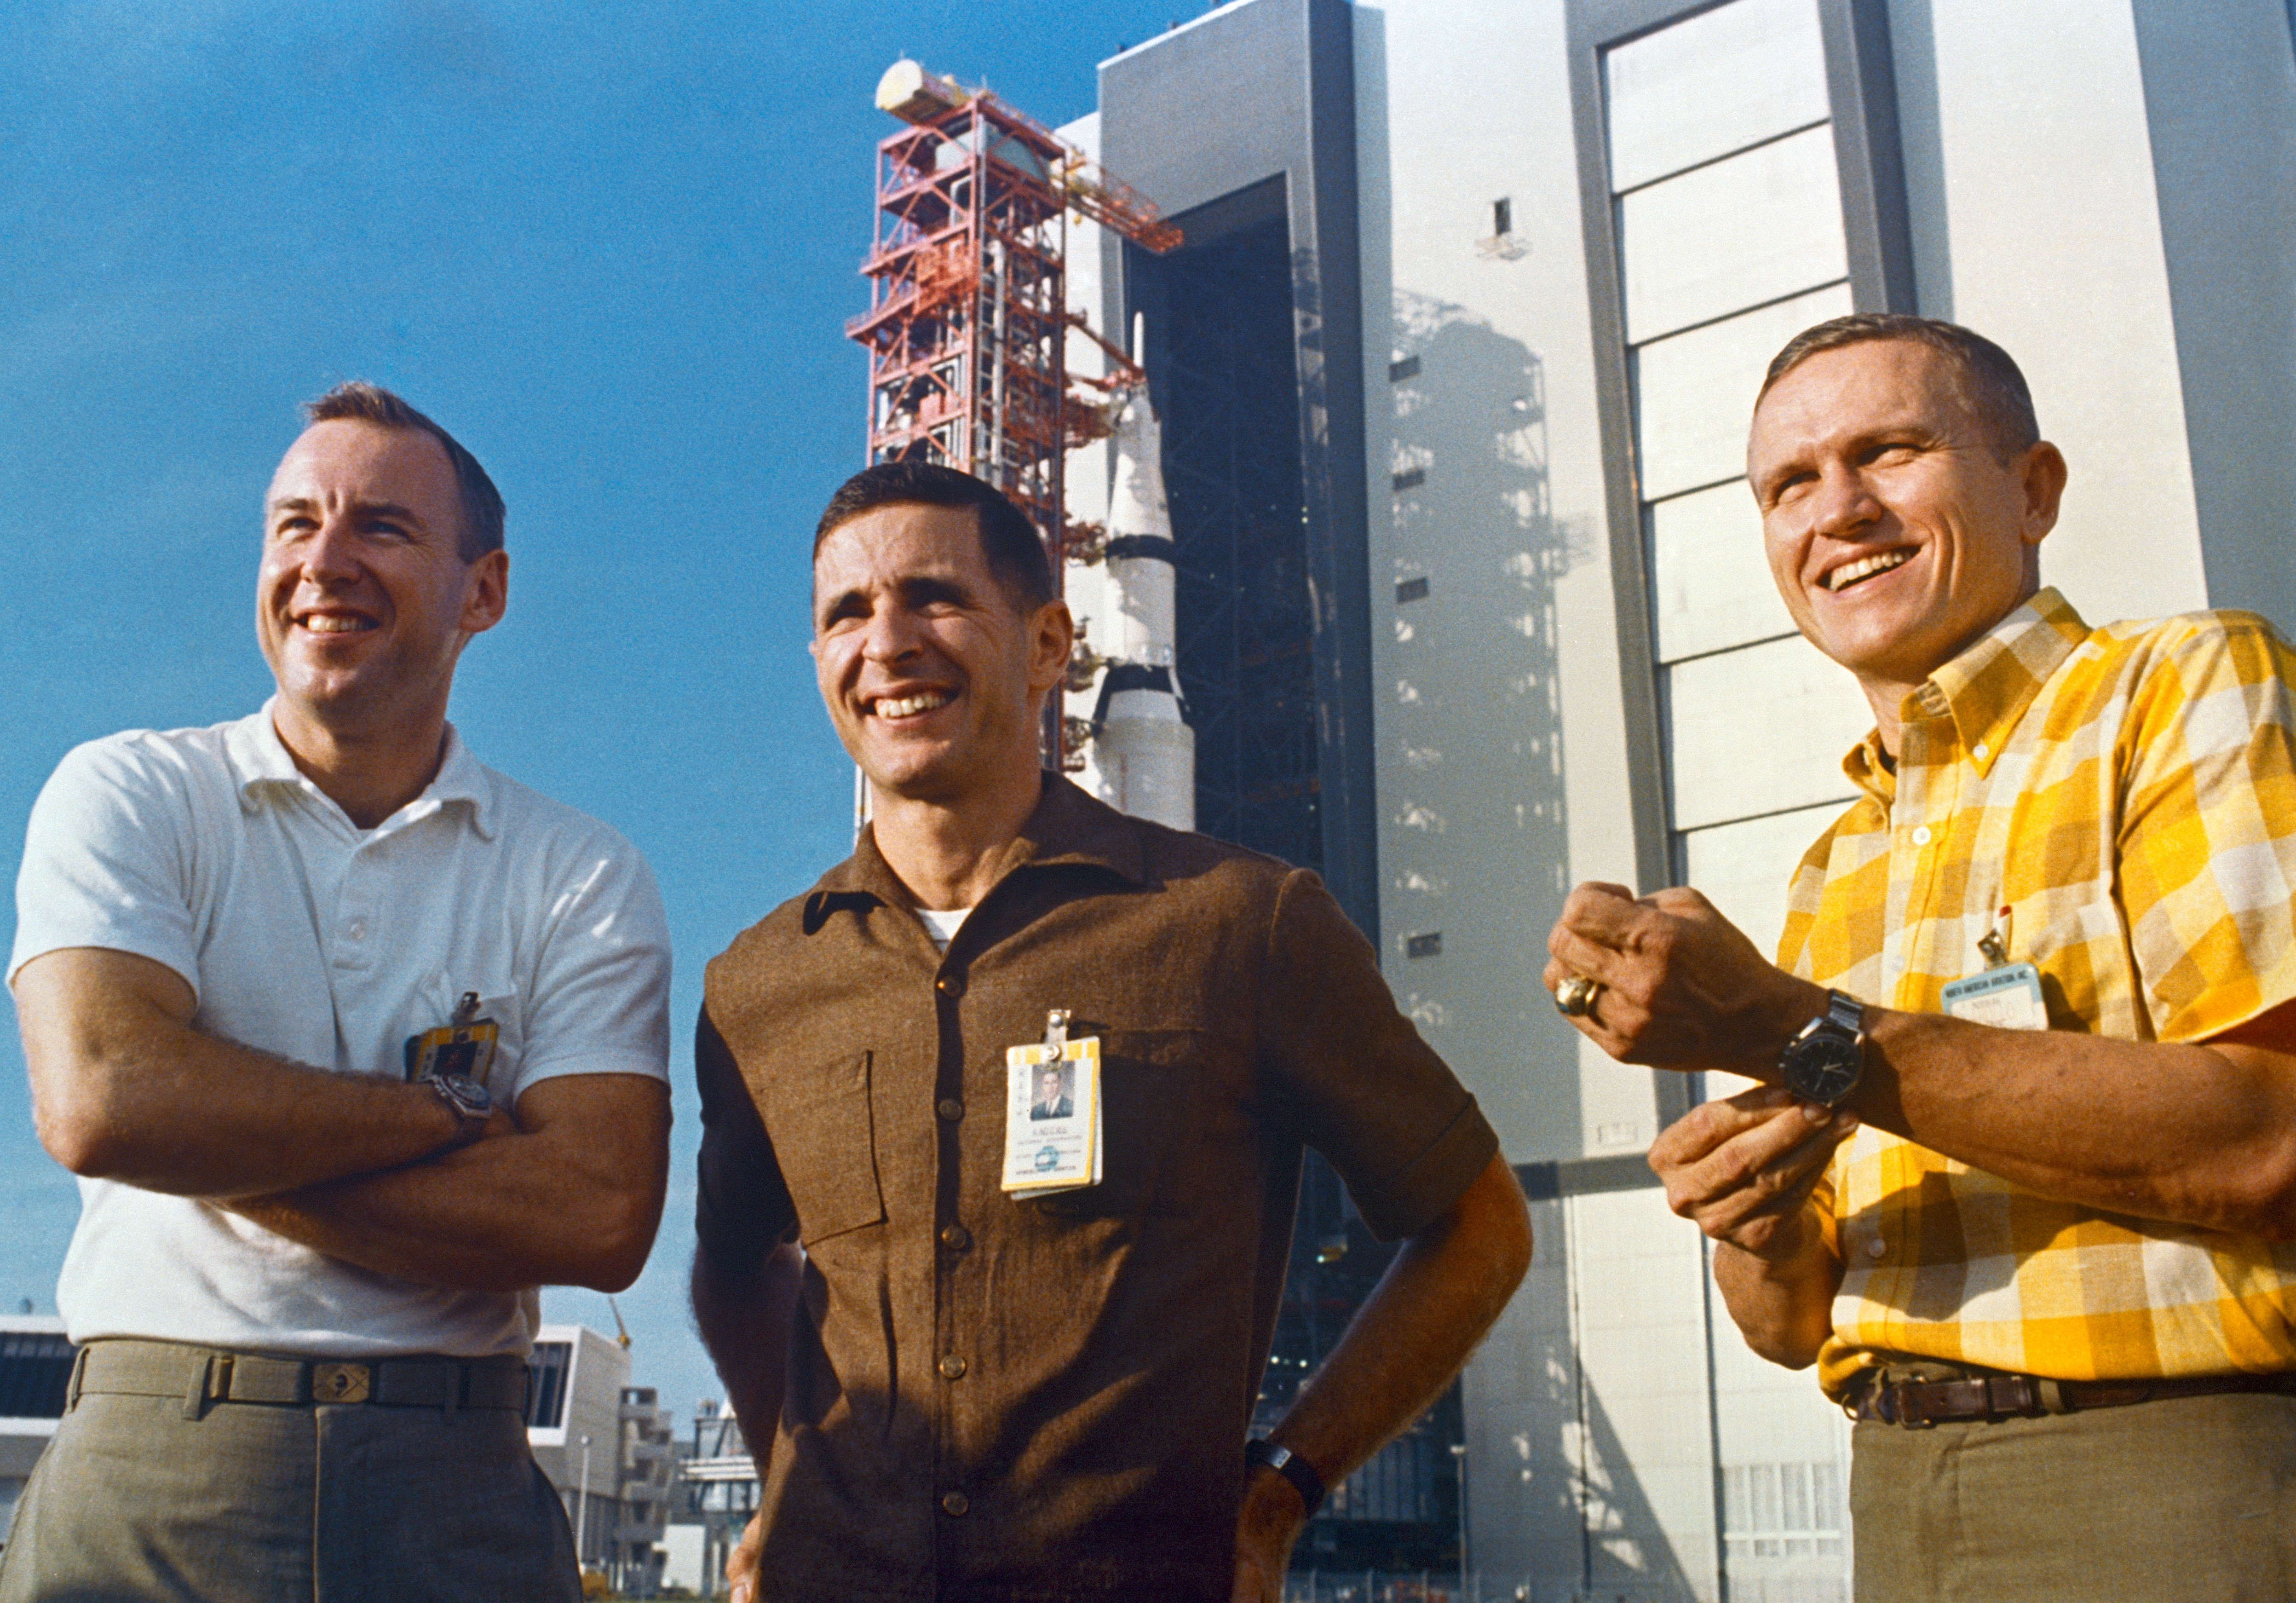 Apollo 8 astronauts James A. Lovell, William A. Anders, and Frank Borman attend the rollout of their Saturn V from the Vehicle Assembly Building to Launch Pad 39A